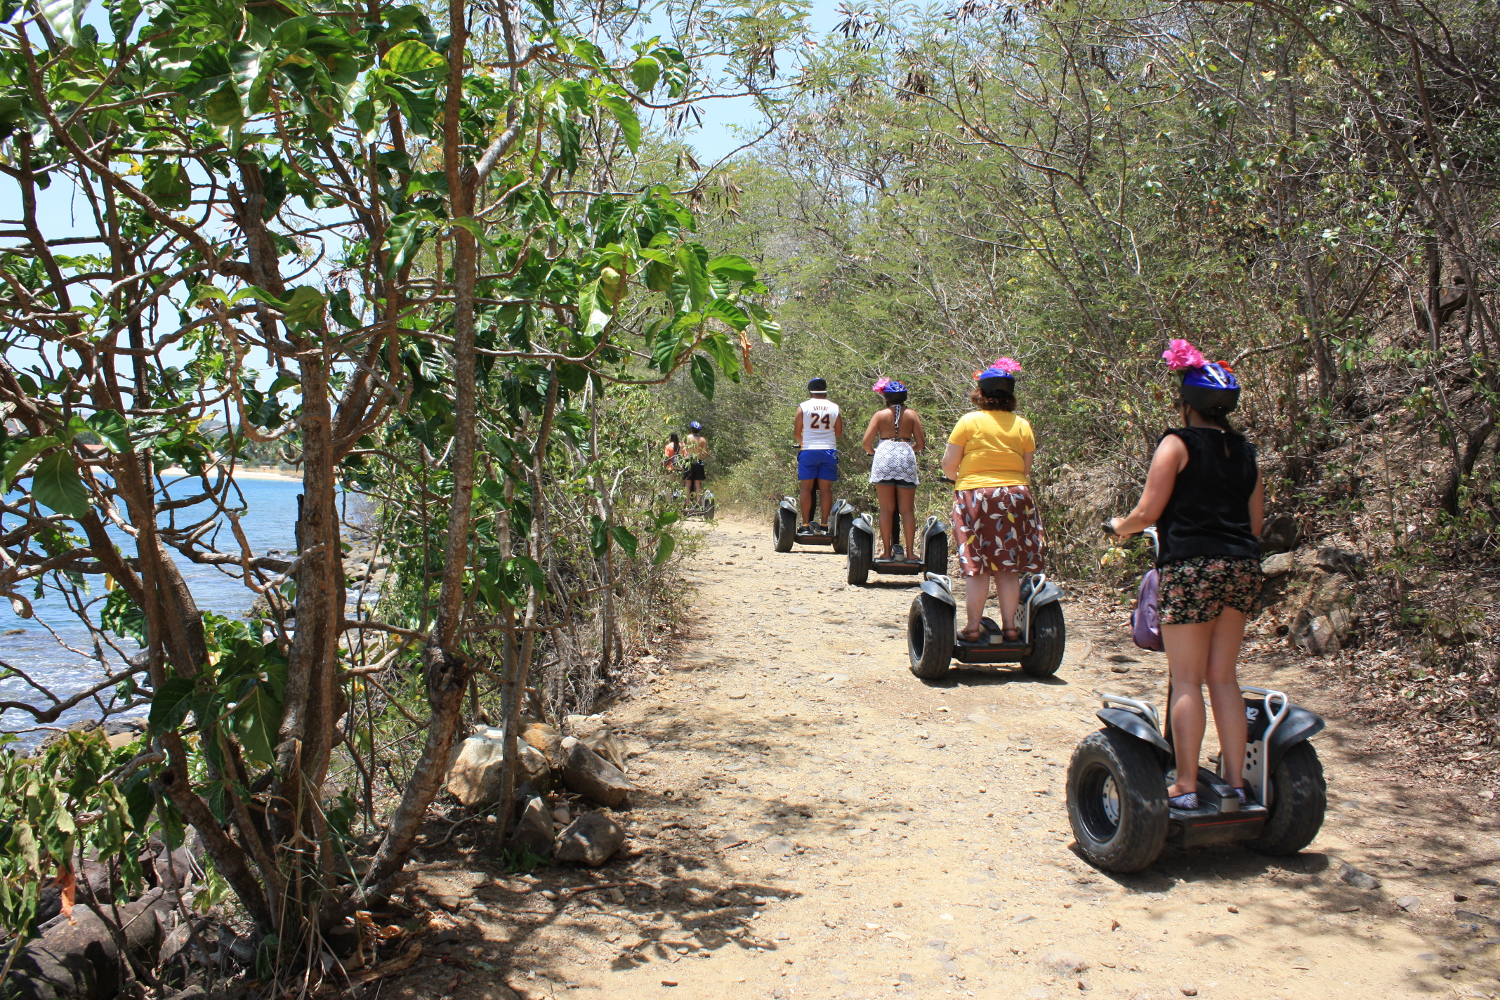 If you can make the segway do what you want, it's the perfect way to whizz around St Lucia. Image by Lorna Parkes / Lonely Planet